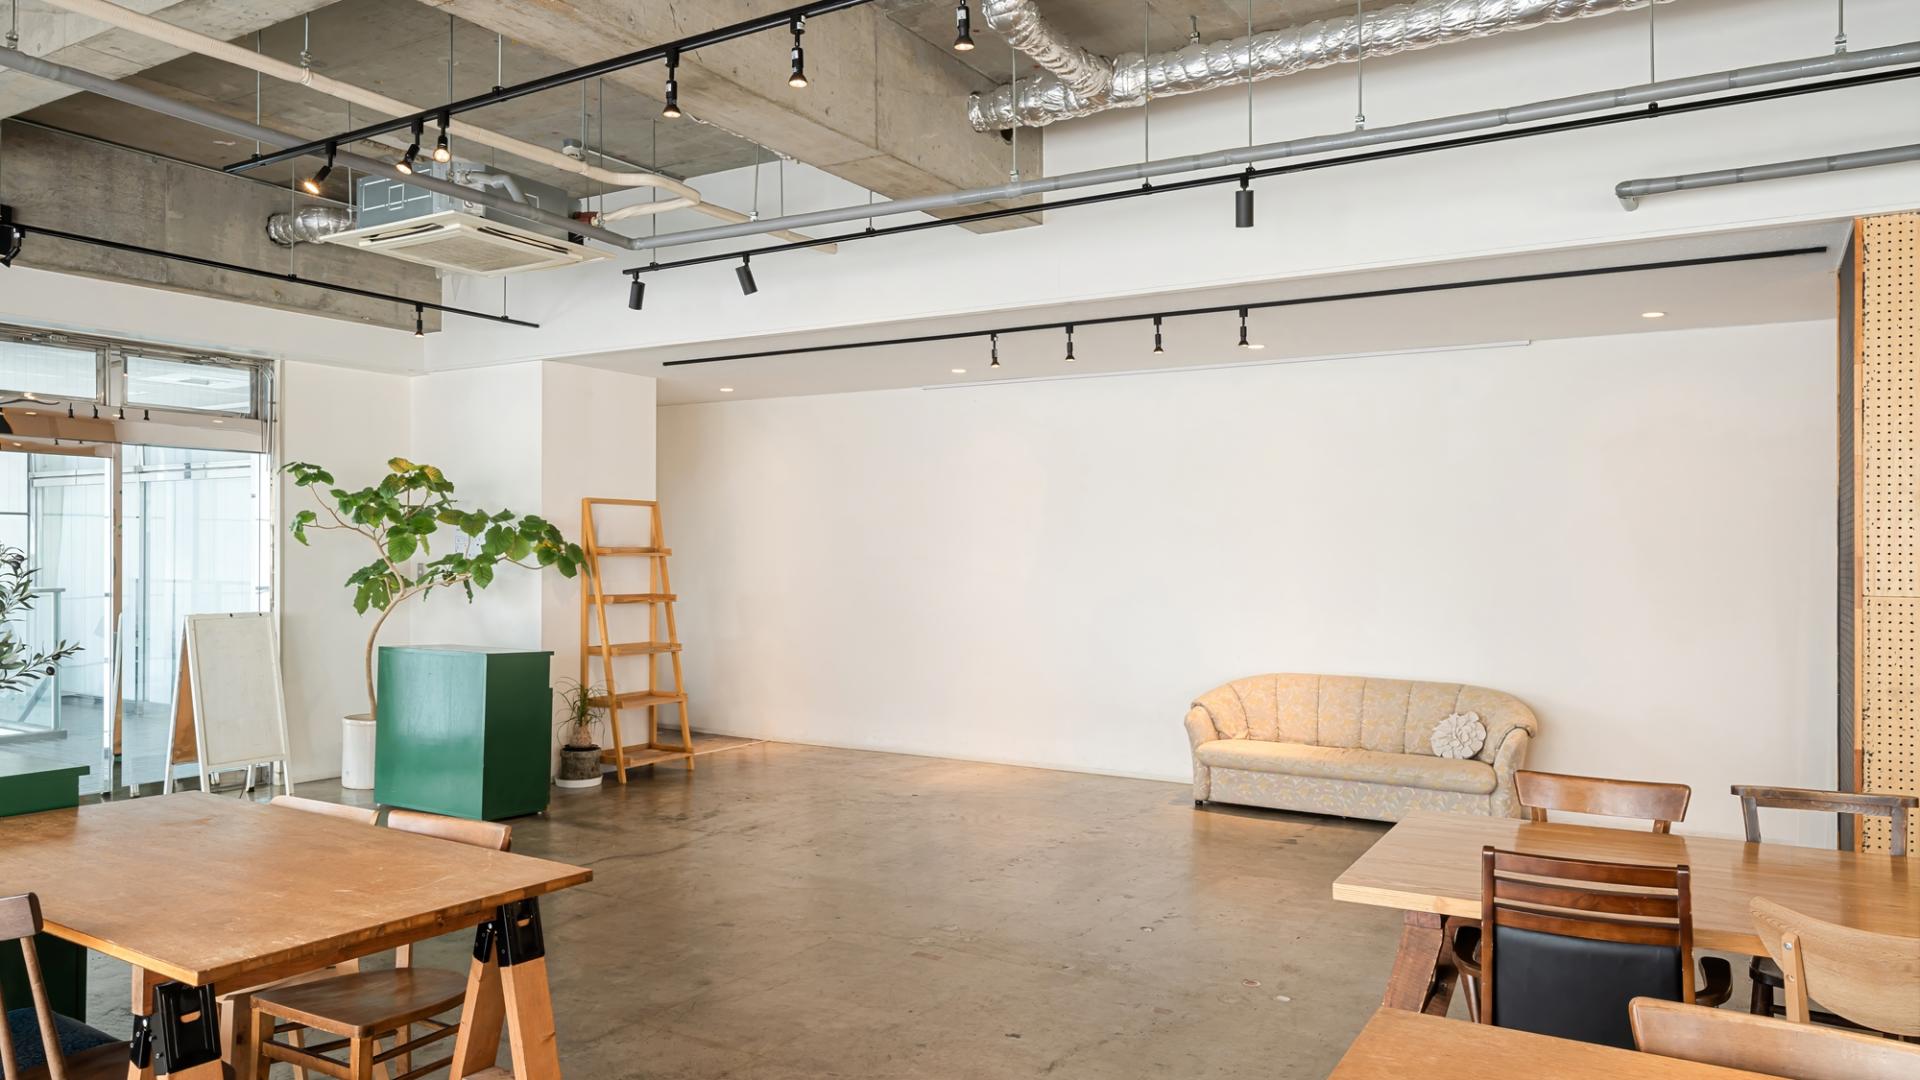 Workshop Venues for Hire in Greenwich